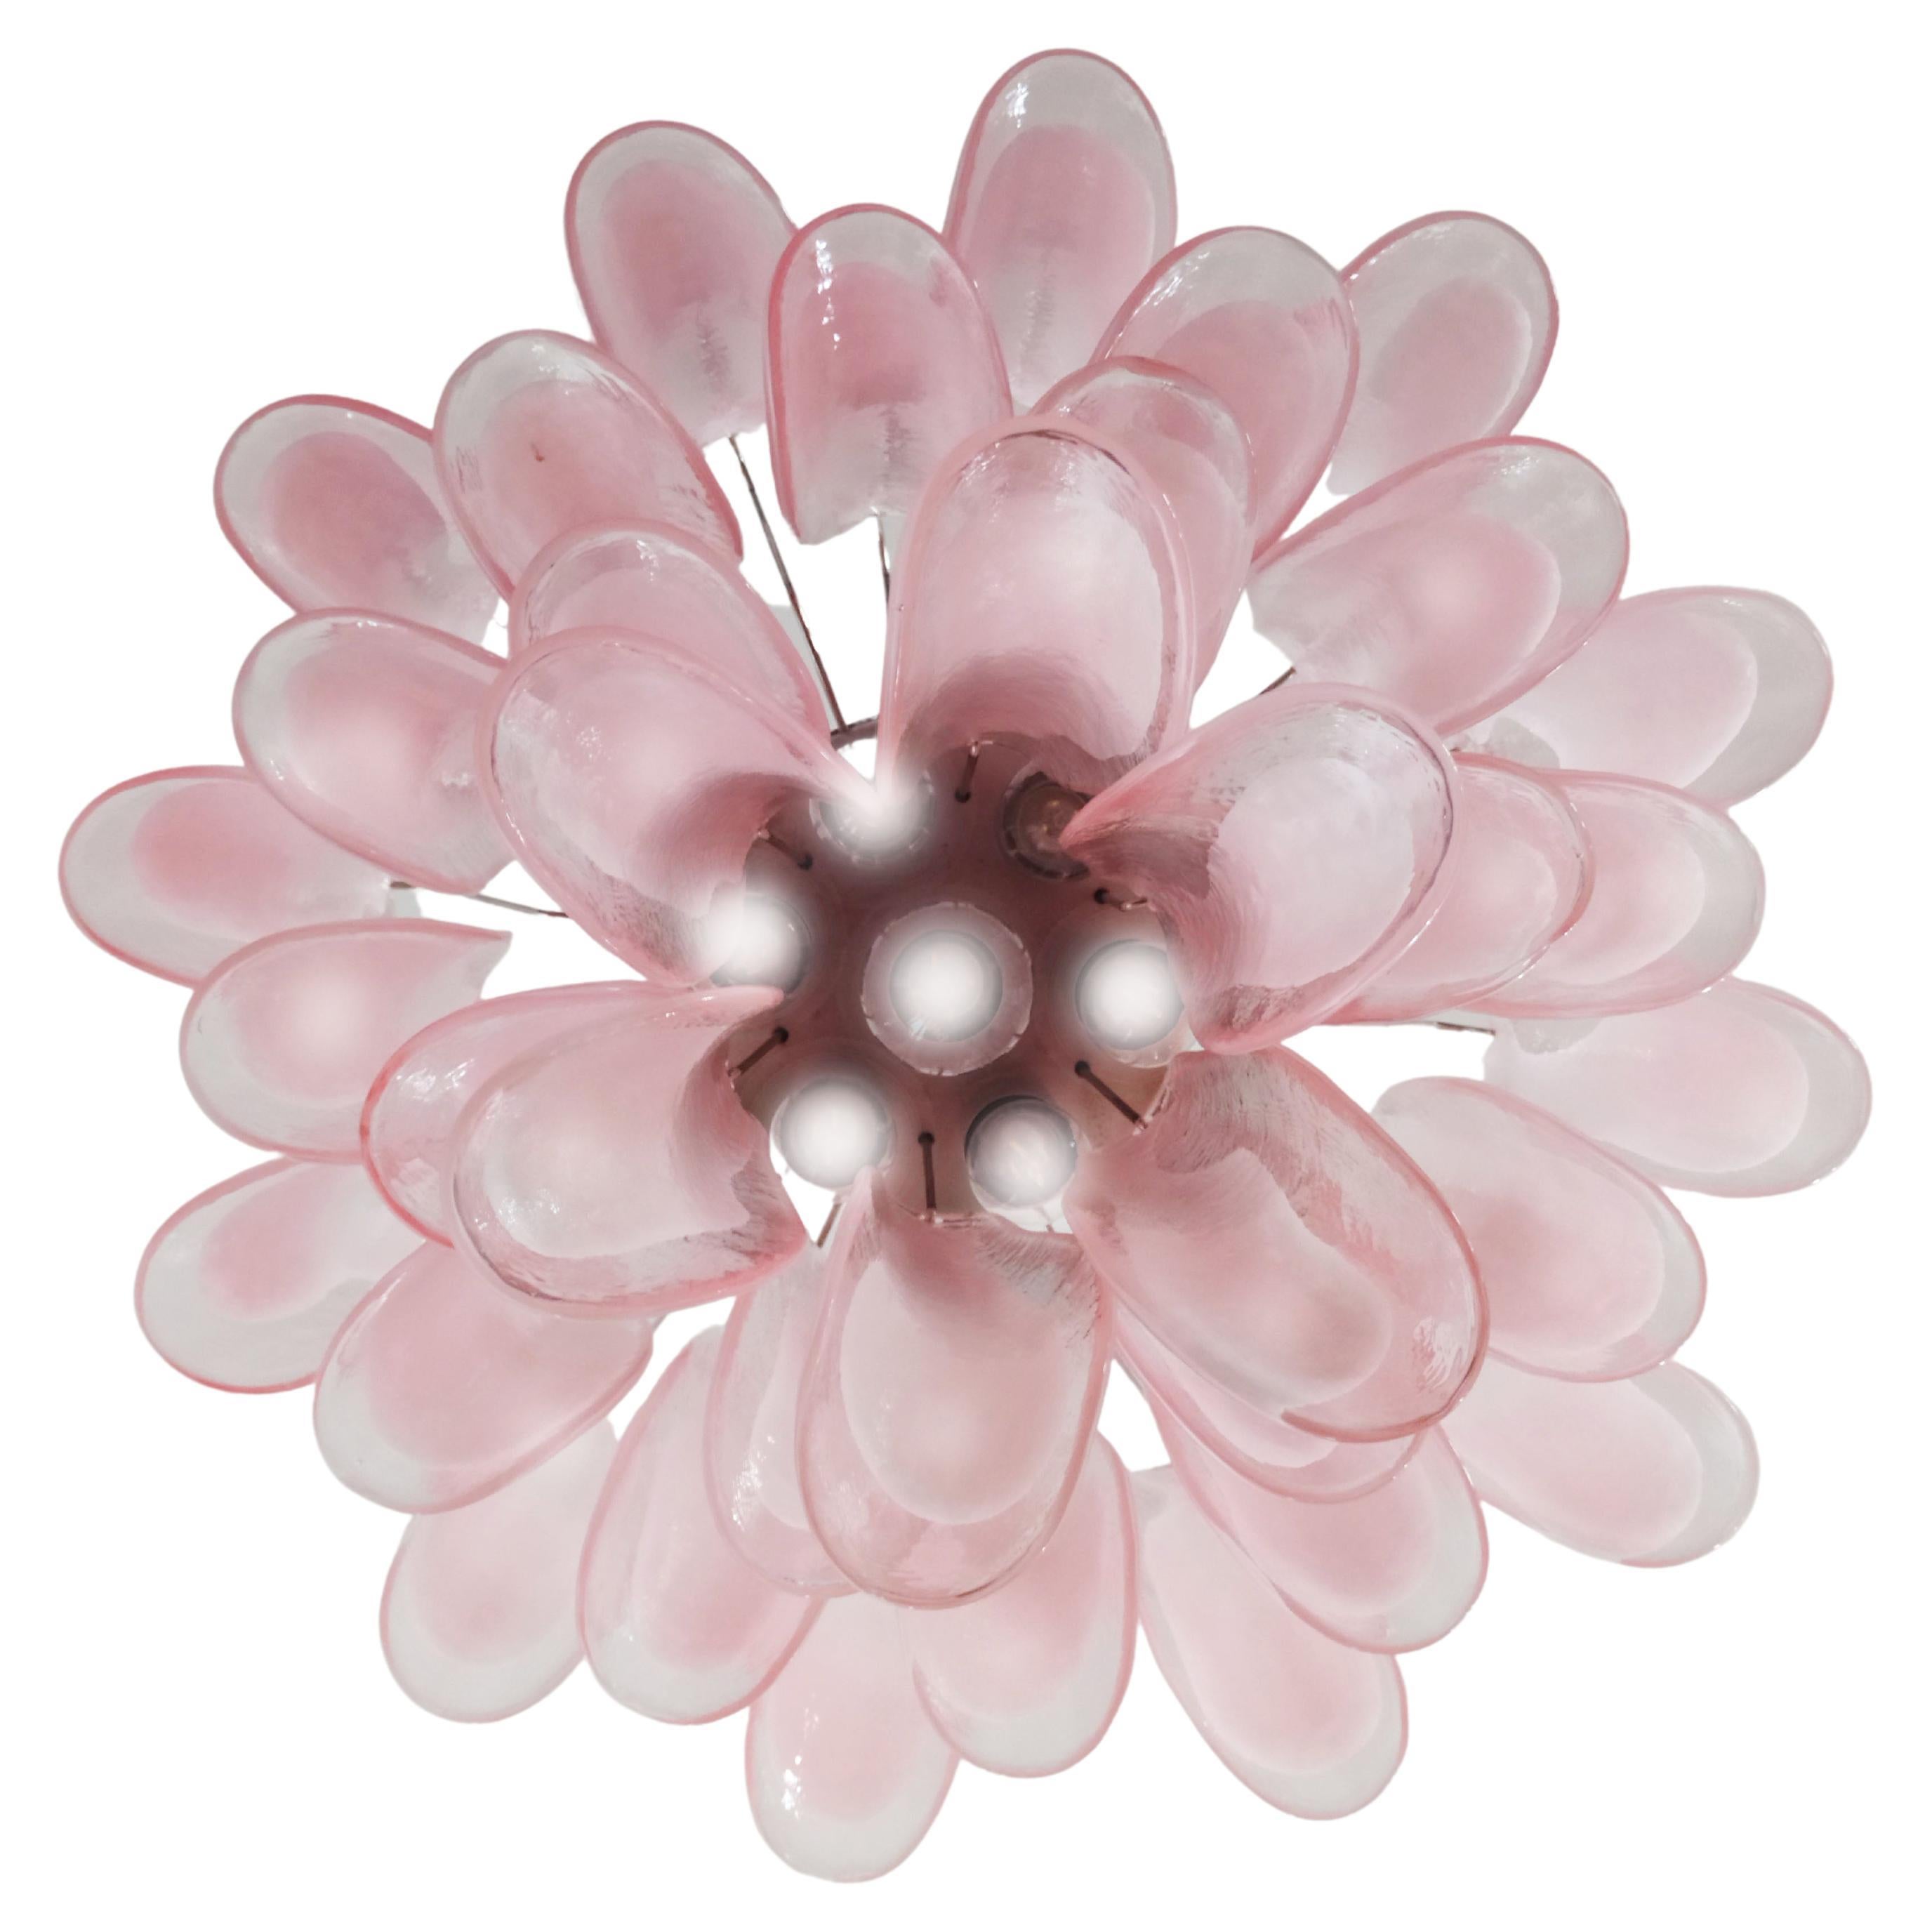 1970’s Murano Italian glass chandelier. Fantastic chandelier with pink and white “lattimo” glasses, nickel-plated metal frame. It has 36 big monumental petals glass. The glasses are very high quality, the photos do not do the beauty, luster of these